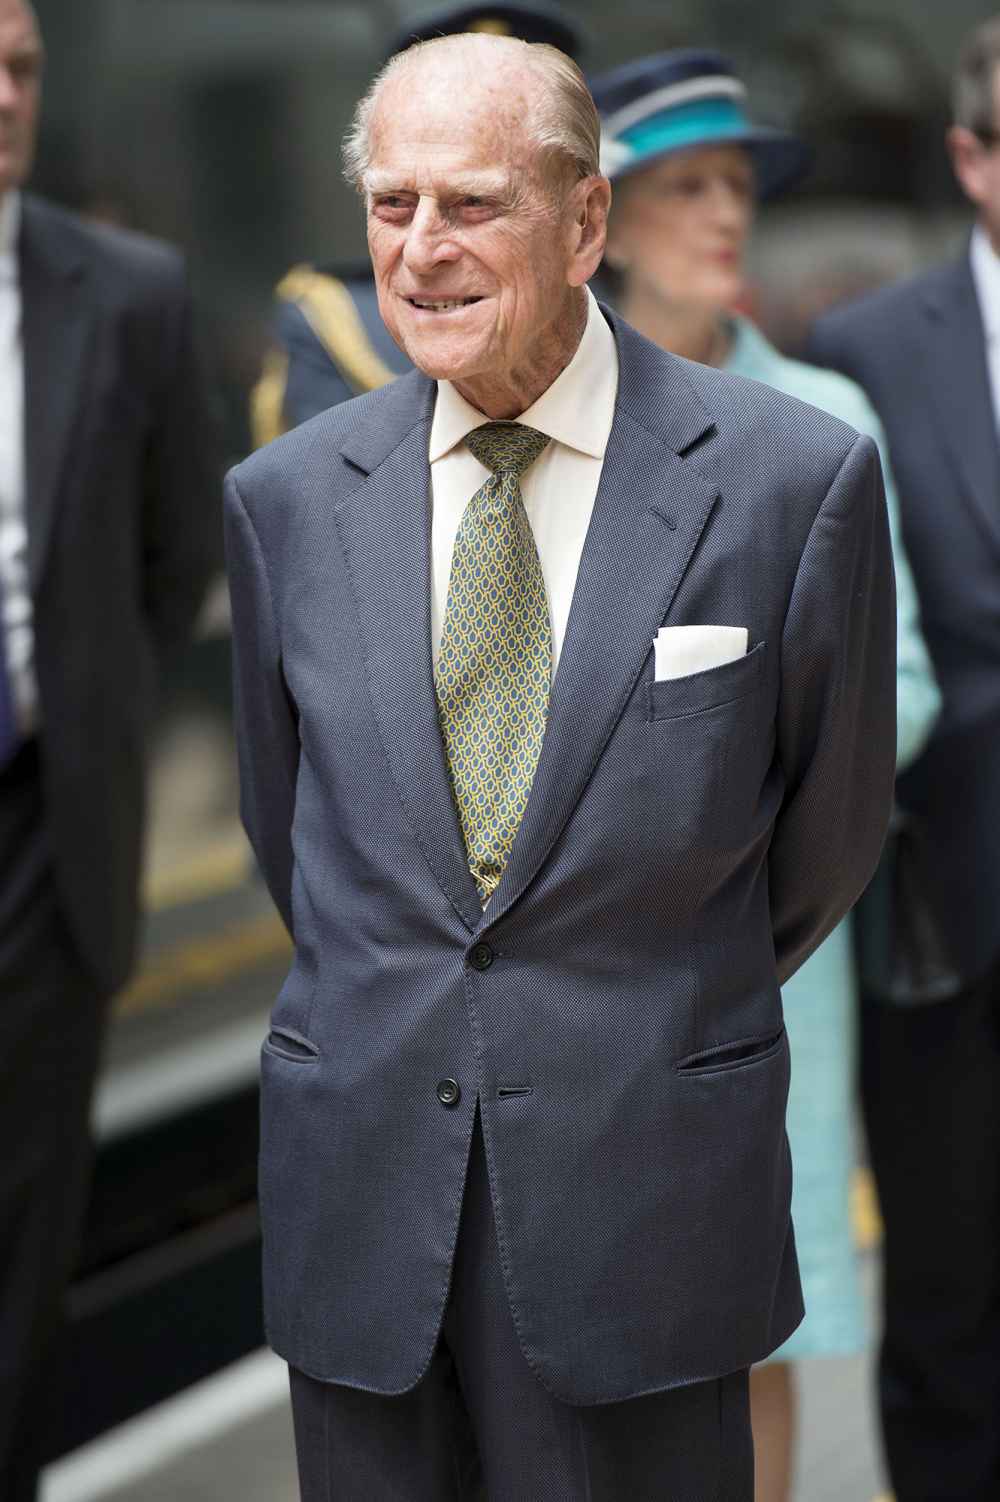 Prince Philip Receives Birthday Wishes From Royal Family